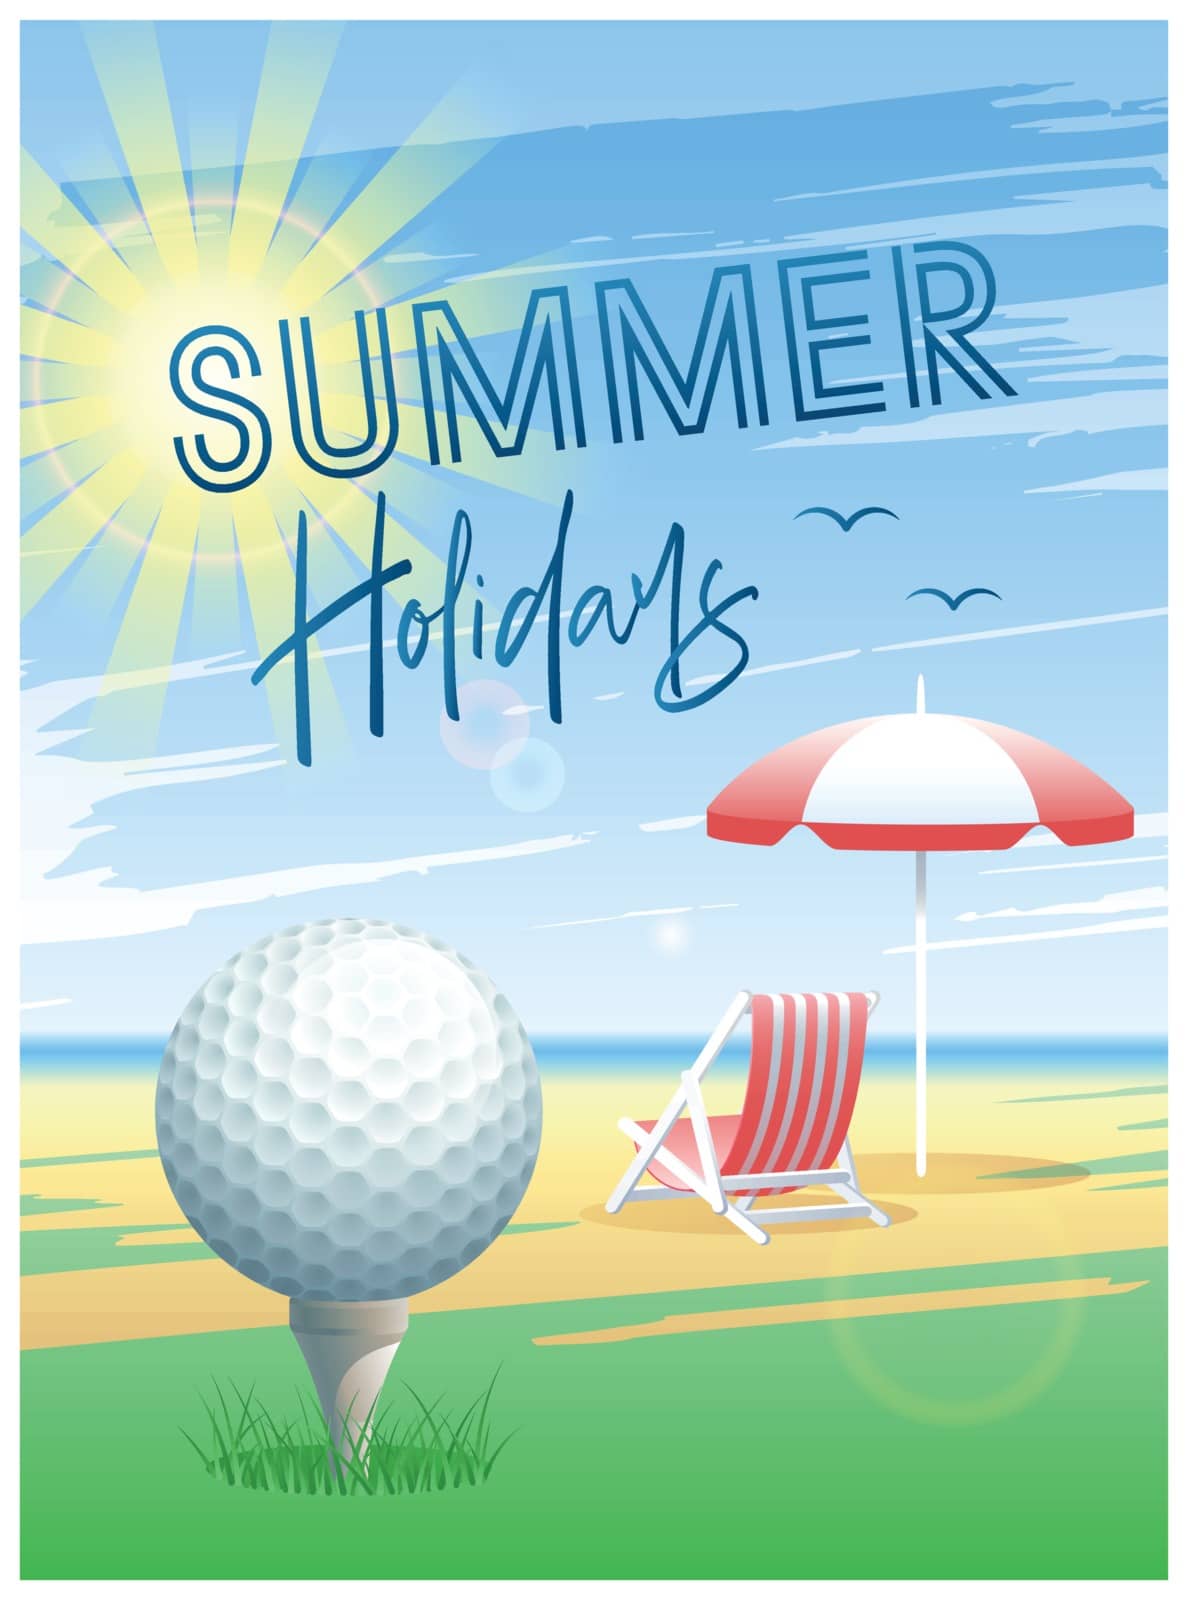 Summer Holidays. Sports card. Golf ball with deck chair and beach umbrella on the beach background. Vector illustration.